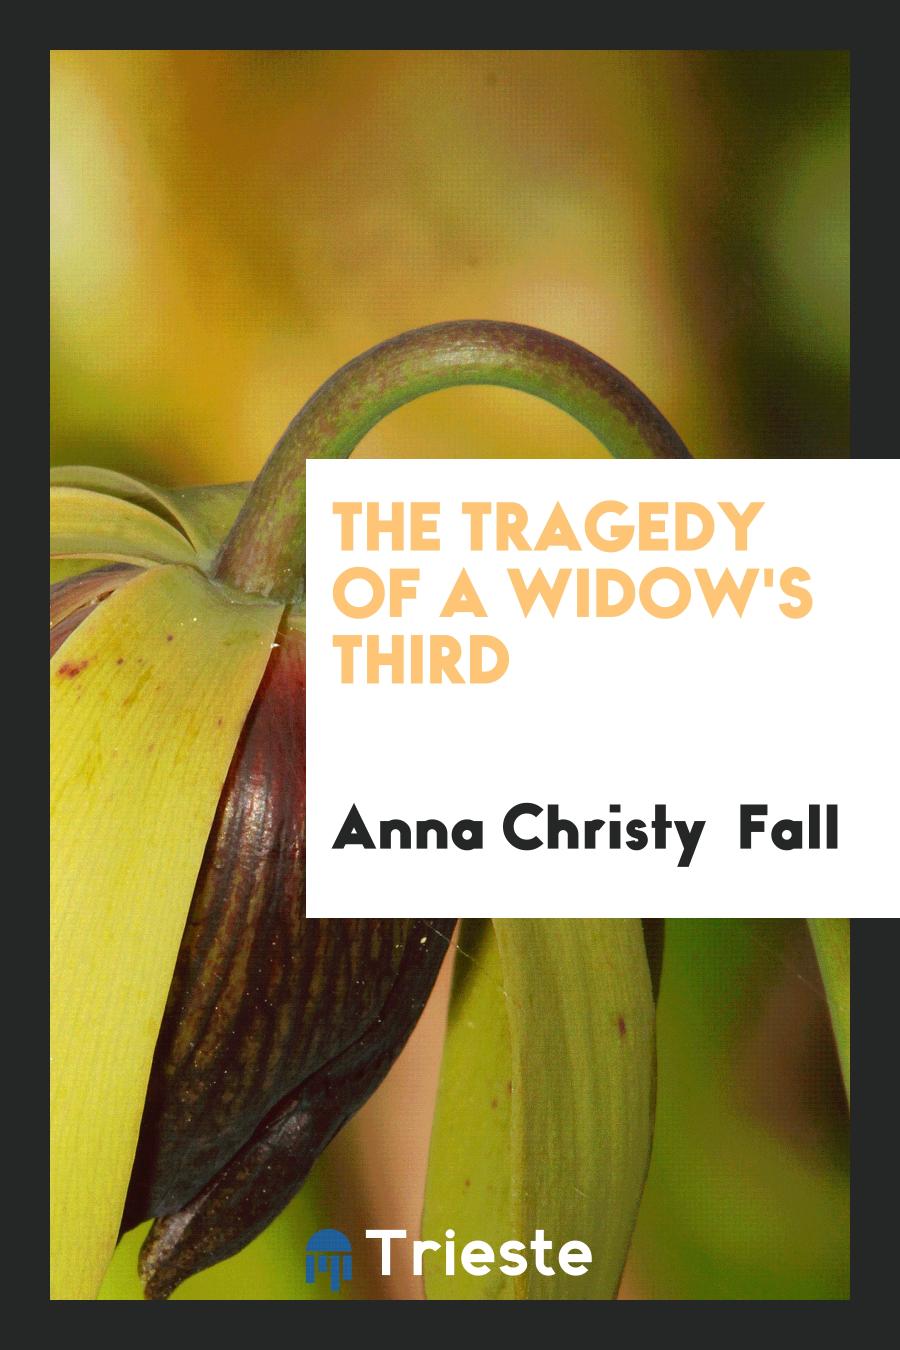 The Tragedy of a Widow's Third